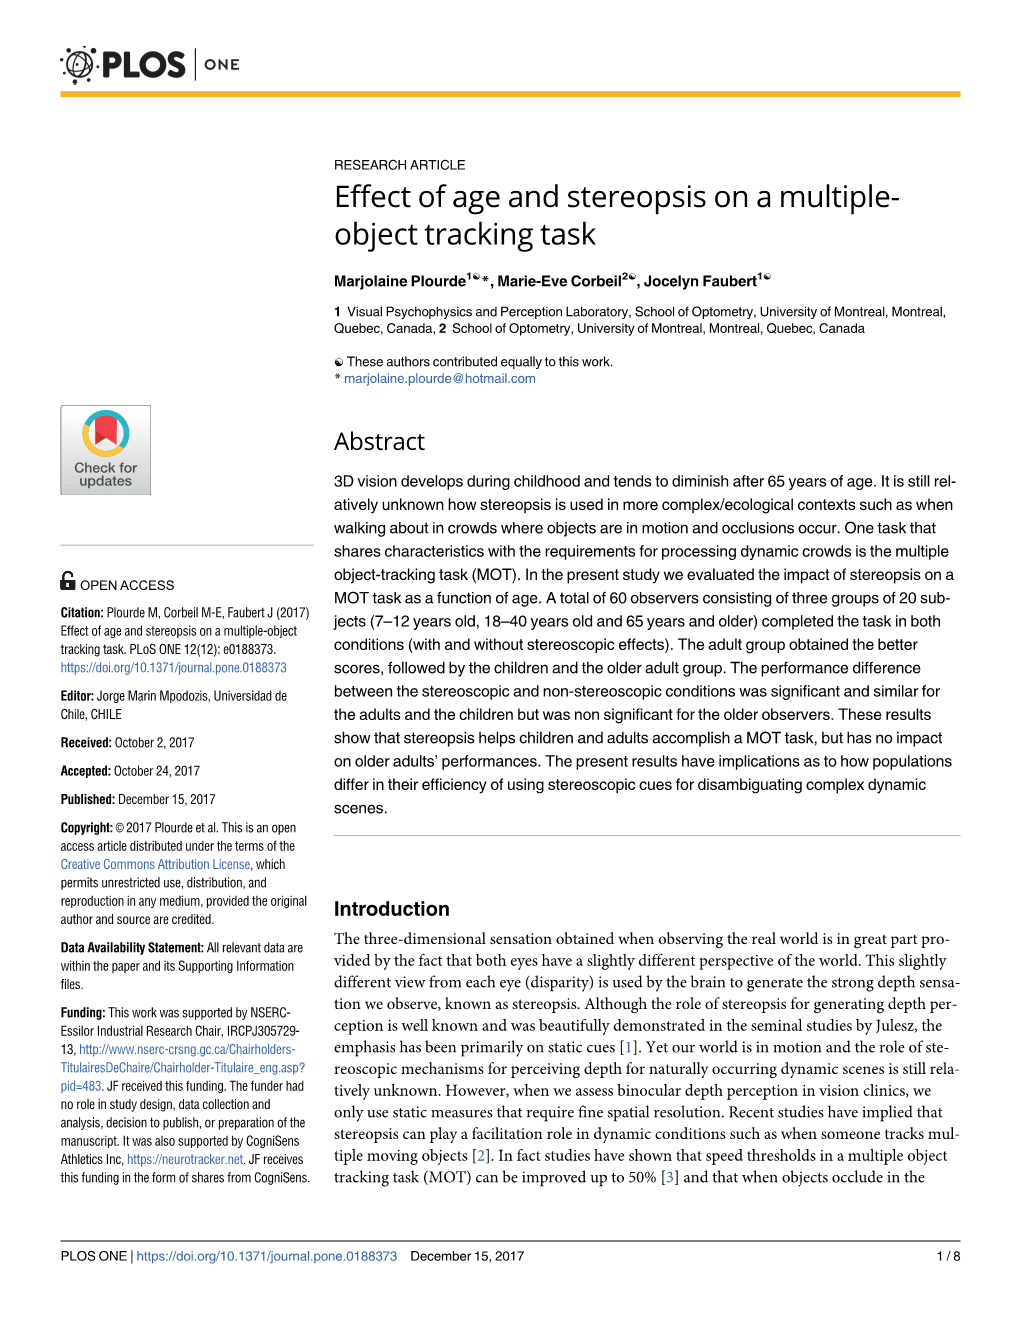 Effect of Age and Stereopsis on a Multiple-Object Tracking Task